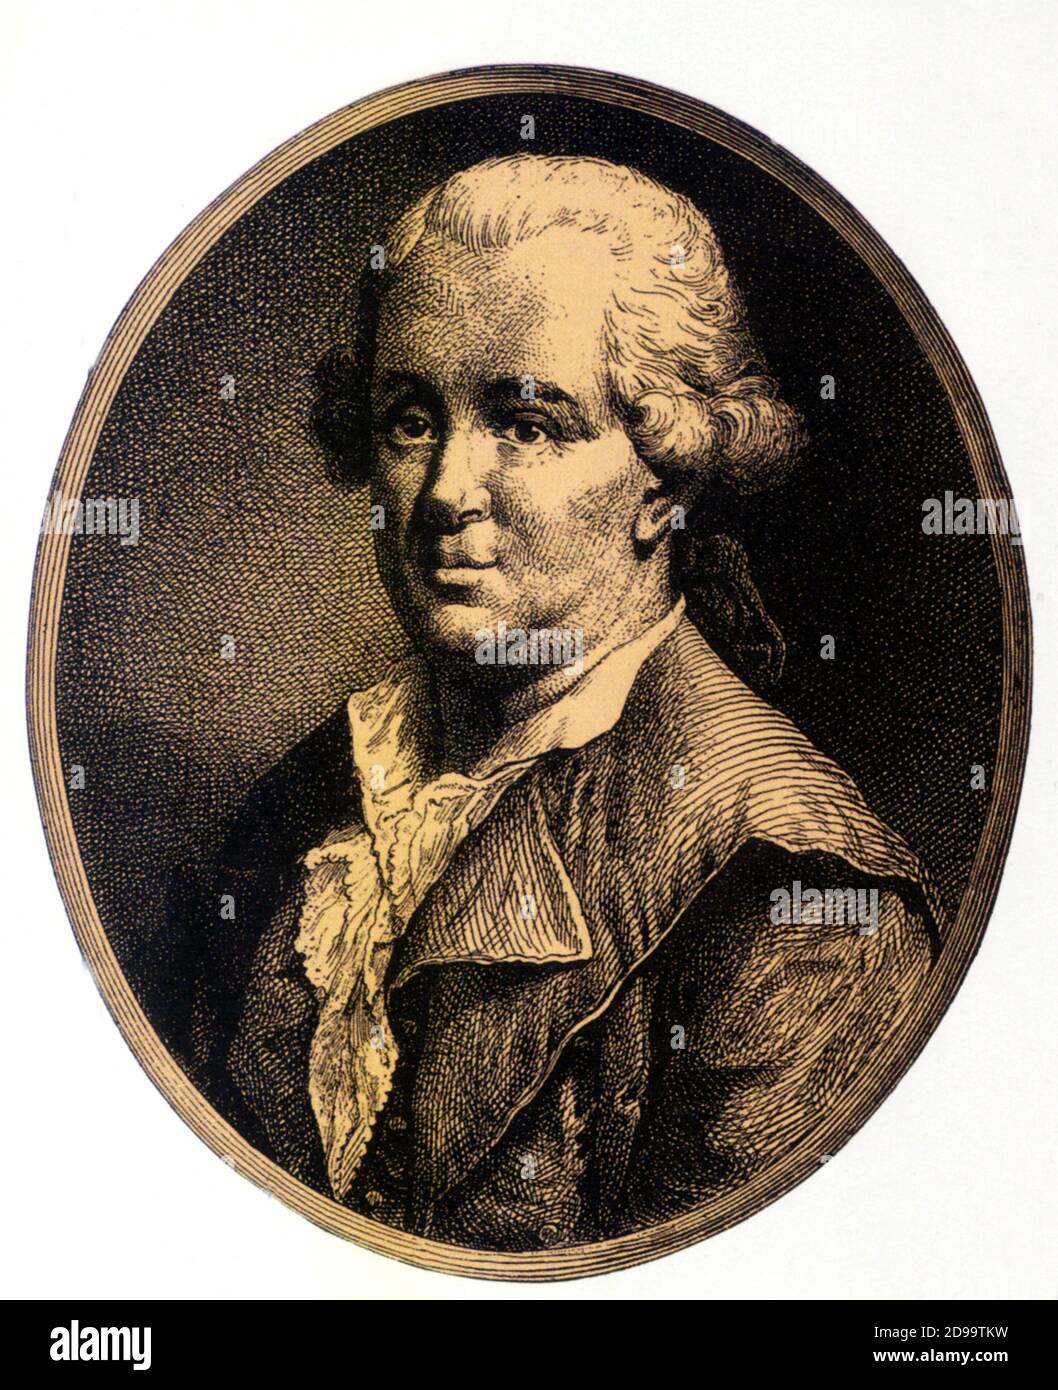 The famous austrian physician  Franz Anton MESMER  ( 1734 -  1815 ) , theorish of  magnetic fields and the astrological influence of the planets , founded on Hypnotism and suggestion - CAMPI MAGNETICI - MAGNETISMO - MEDICINA - Healt - mago - magician - ASTROLOGIA - Astrology - FISICA - MESMERISMO -  IPNOTISMO - IPNOTISTA - MESMERISM  - PARAPSICOLOGIA - PARAPSICOLOGY - Suggestione  ----  Archivio GBB Stock Photo